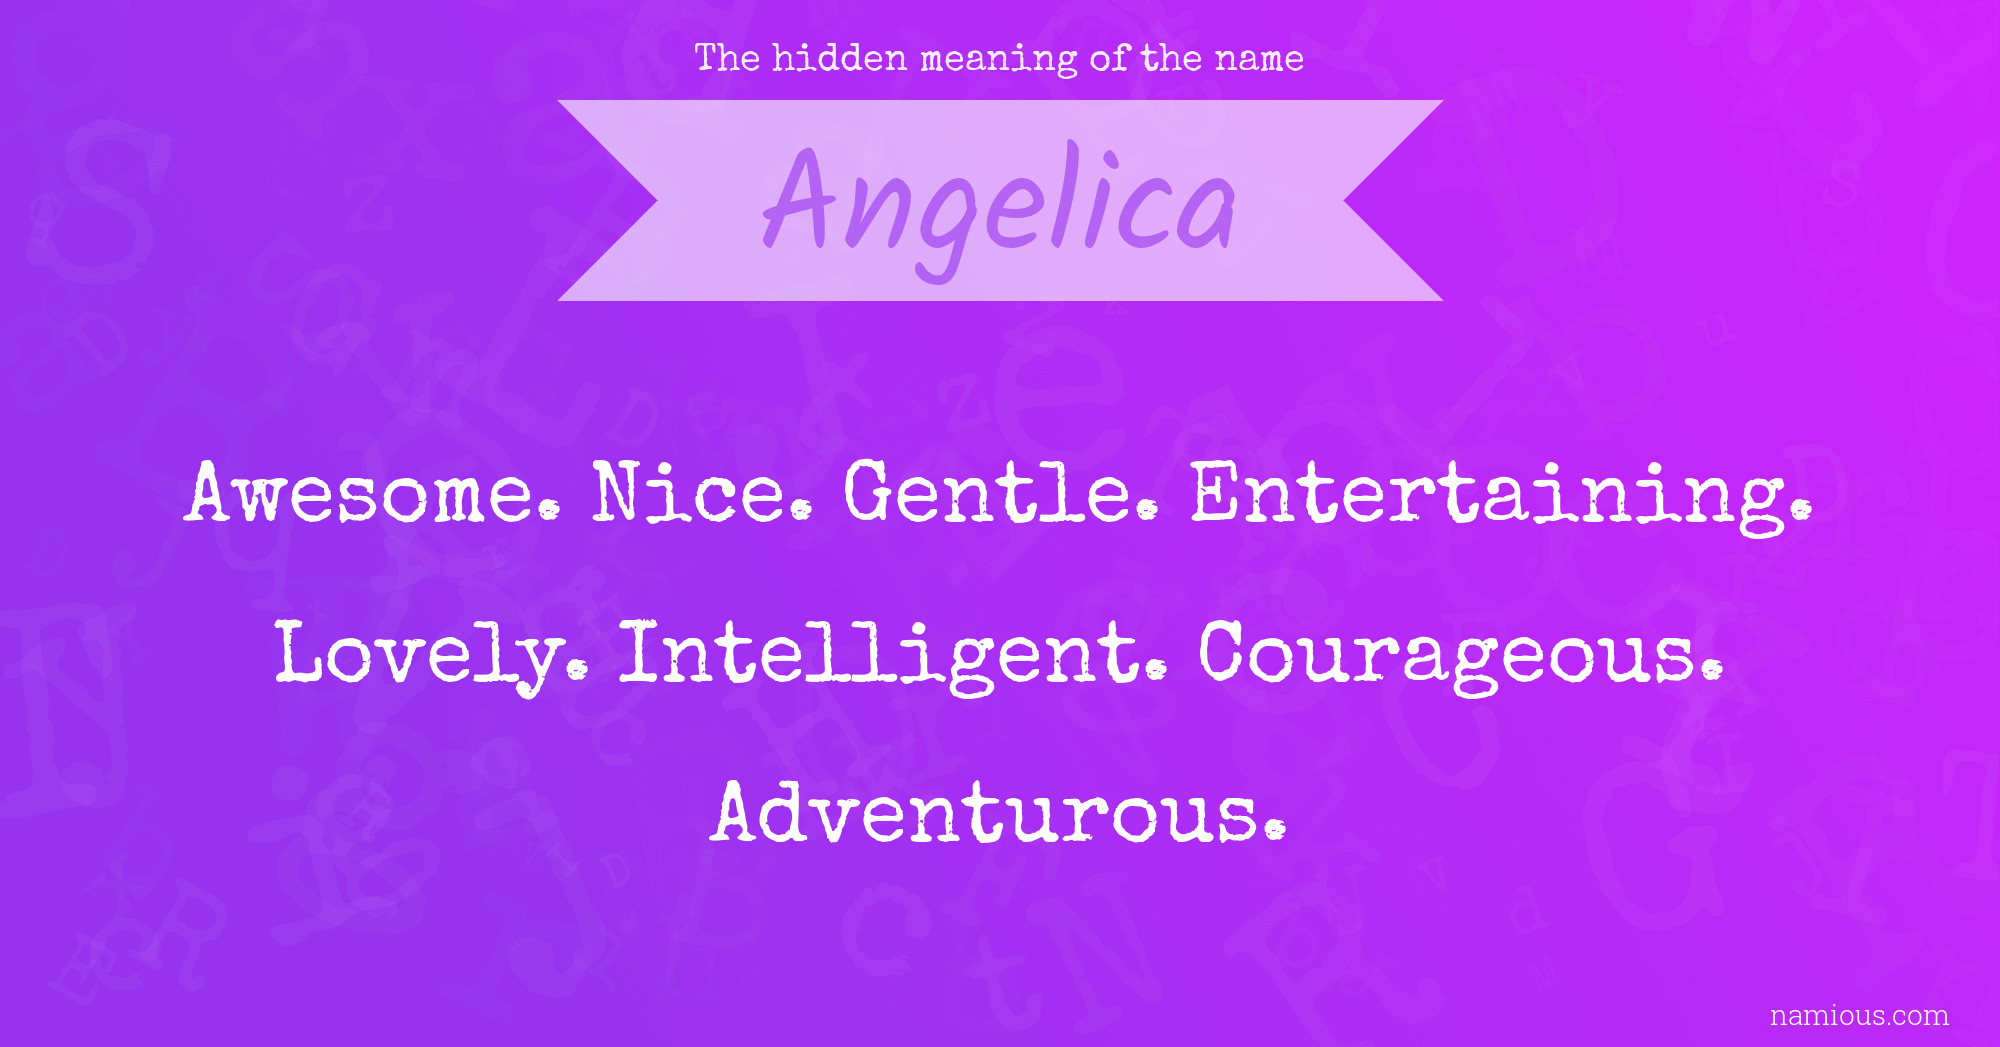 The hidden meaning of the name Angelica